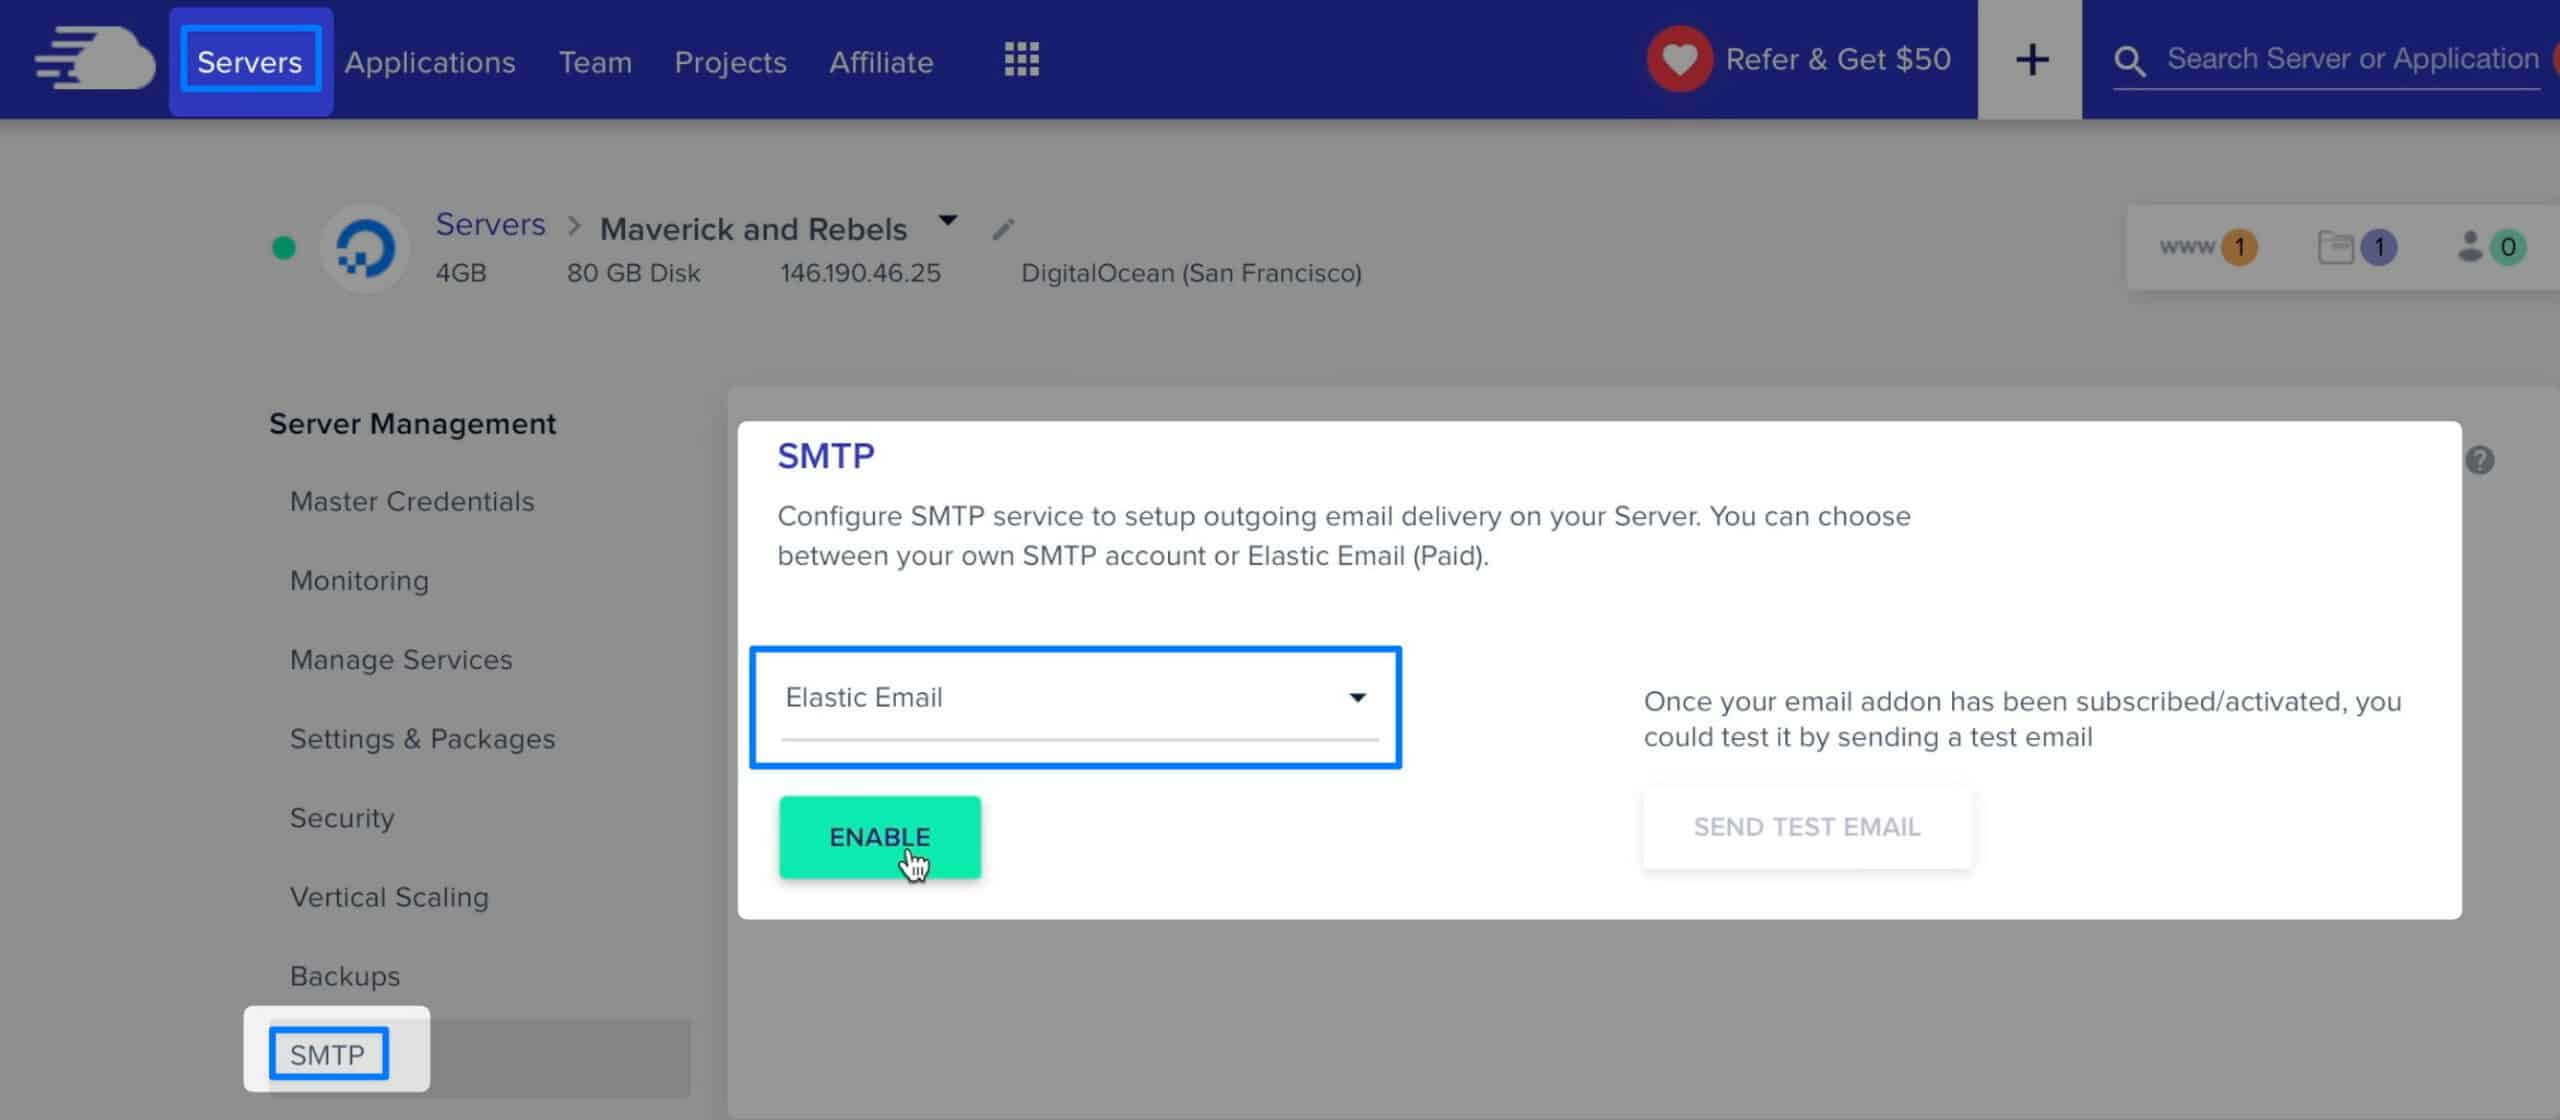 Enable Elastic Email on SMTP